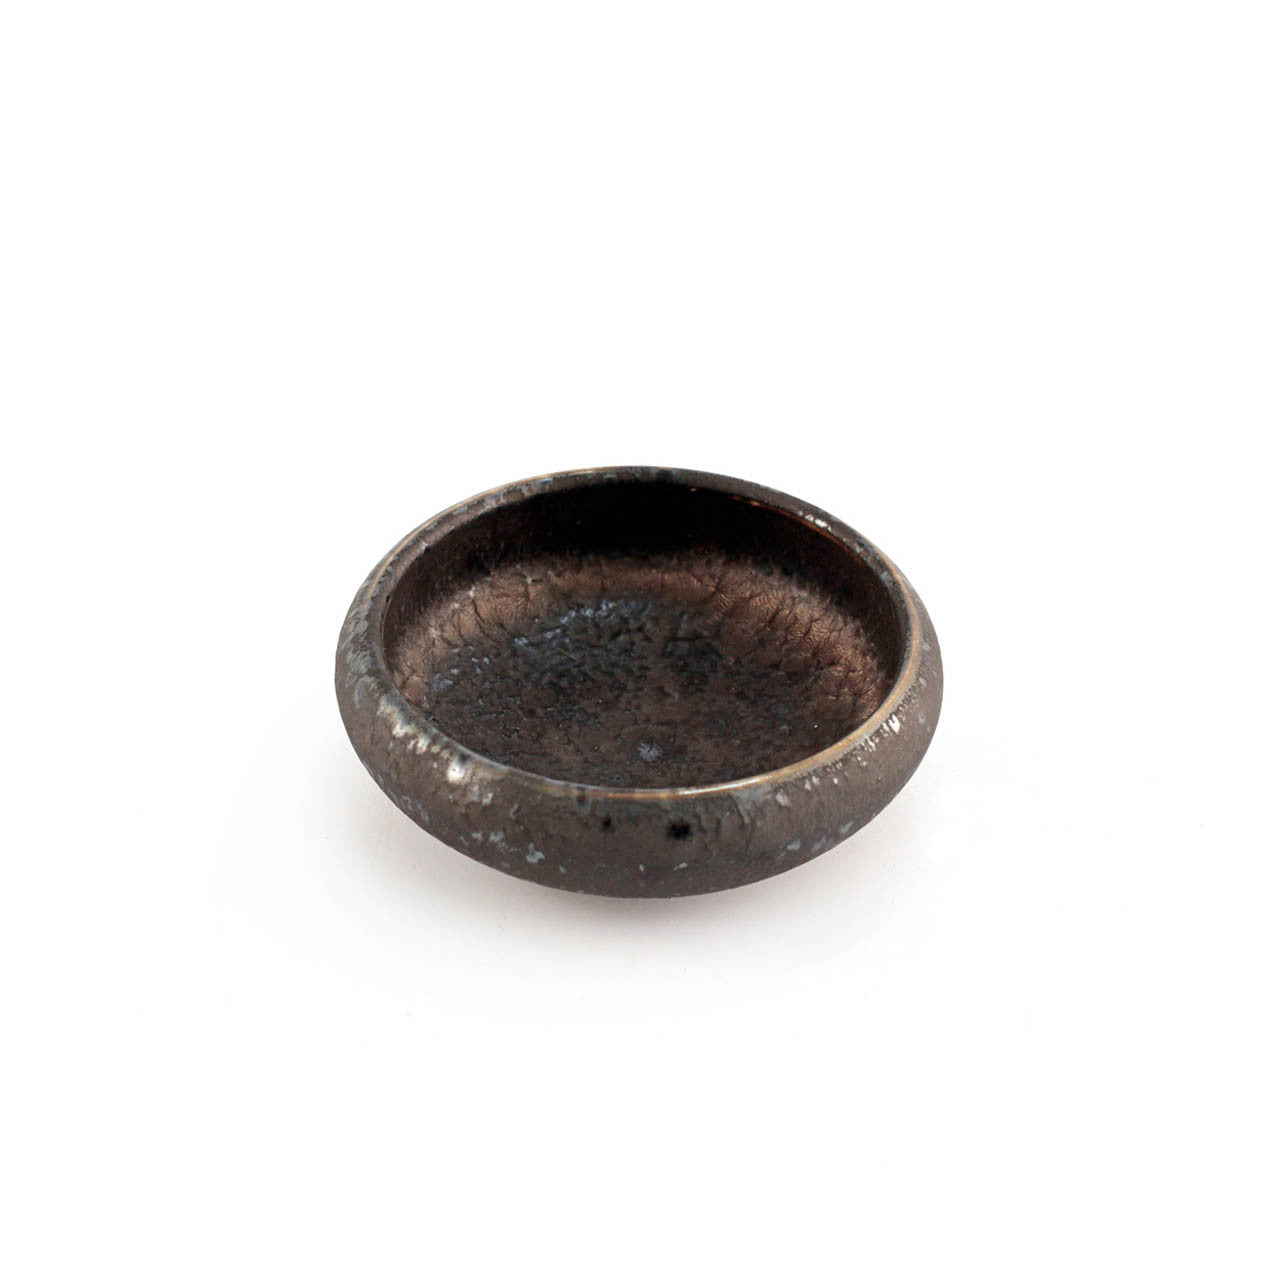 Charcoal Gray Textured Soy Sauce Dish 2.75